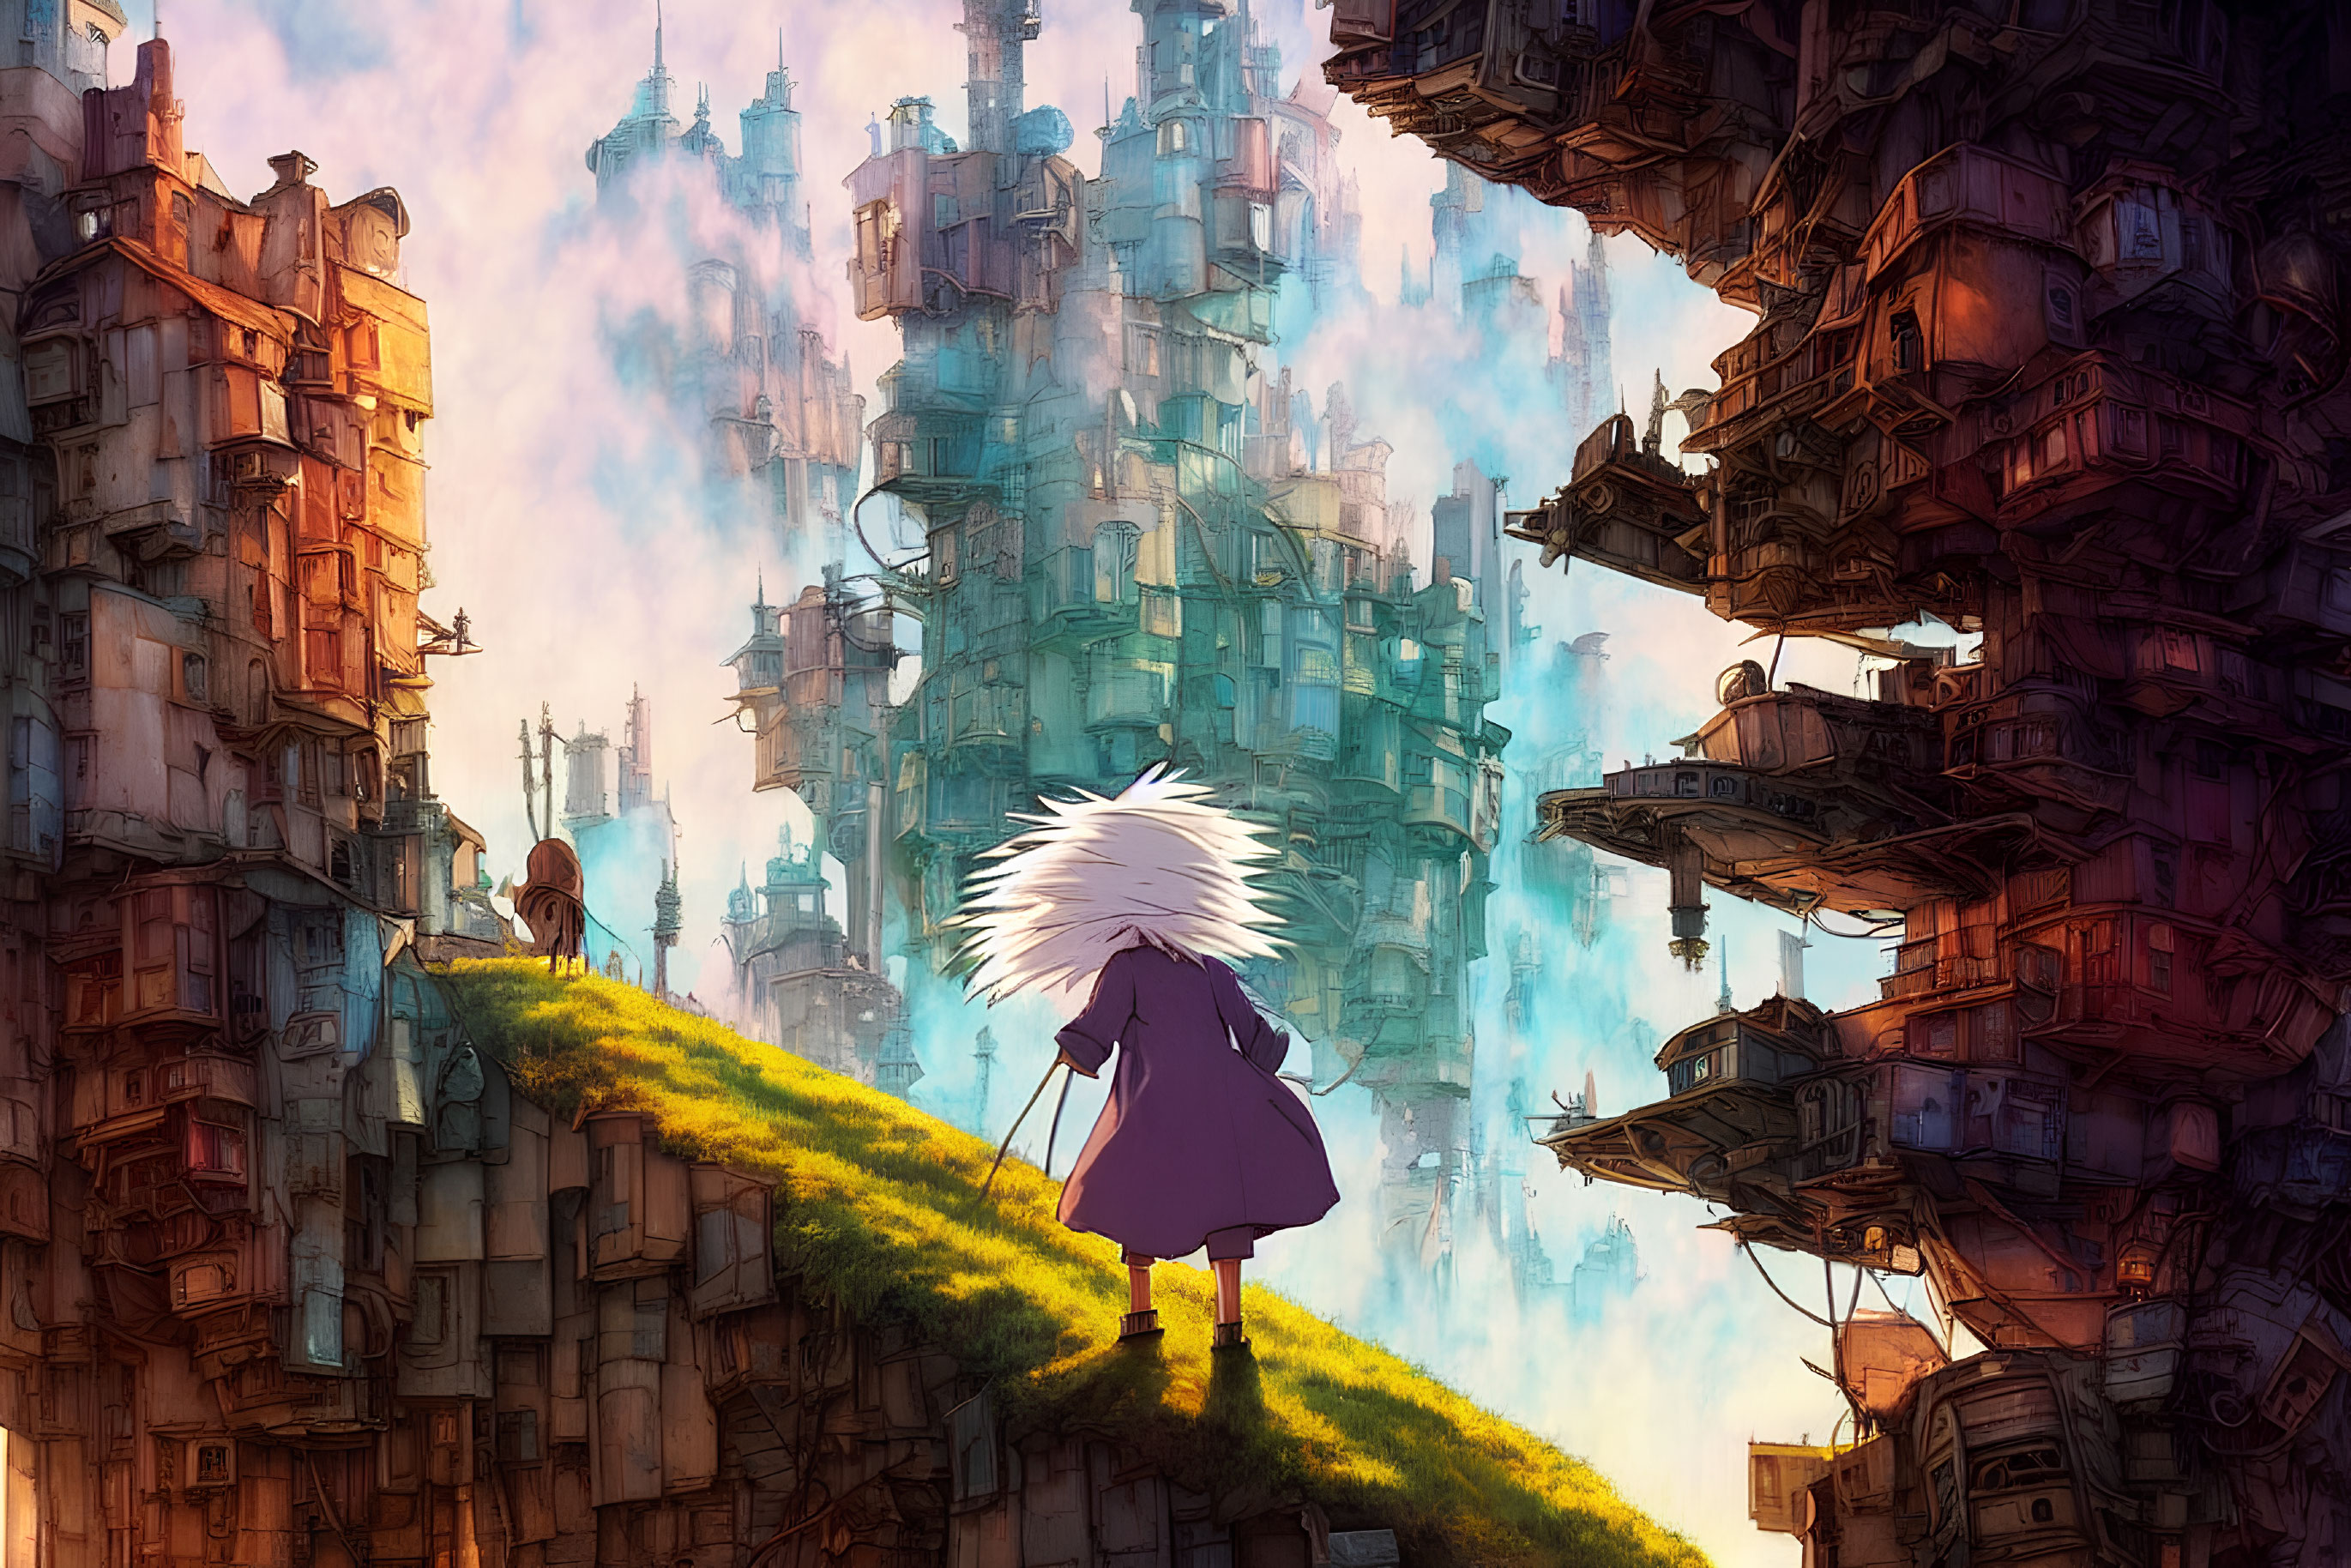 Spiky White-Haired Character in Purple Dress Observing Intricate Cityscape